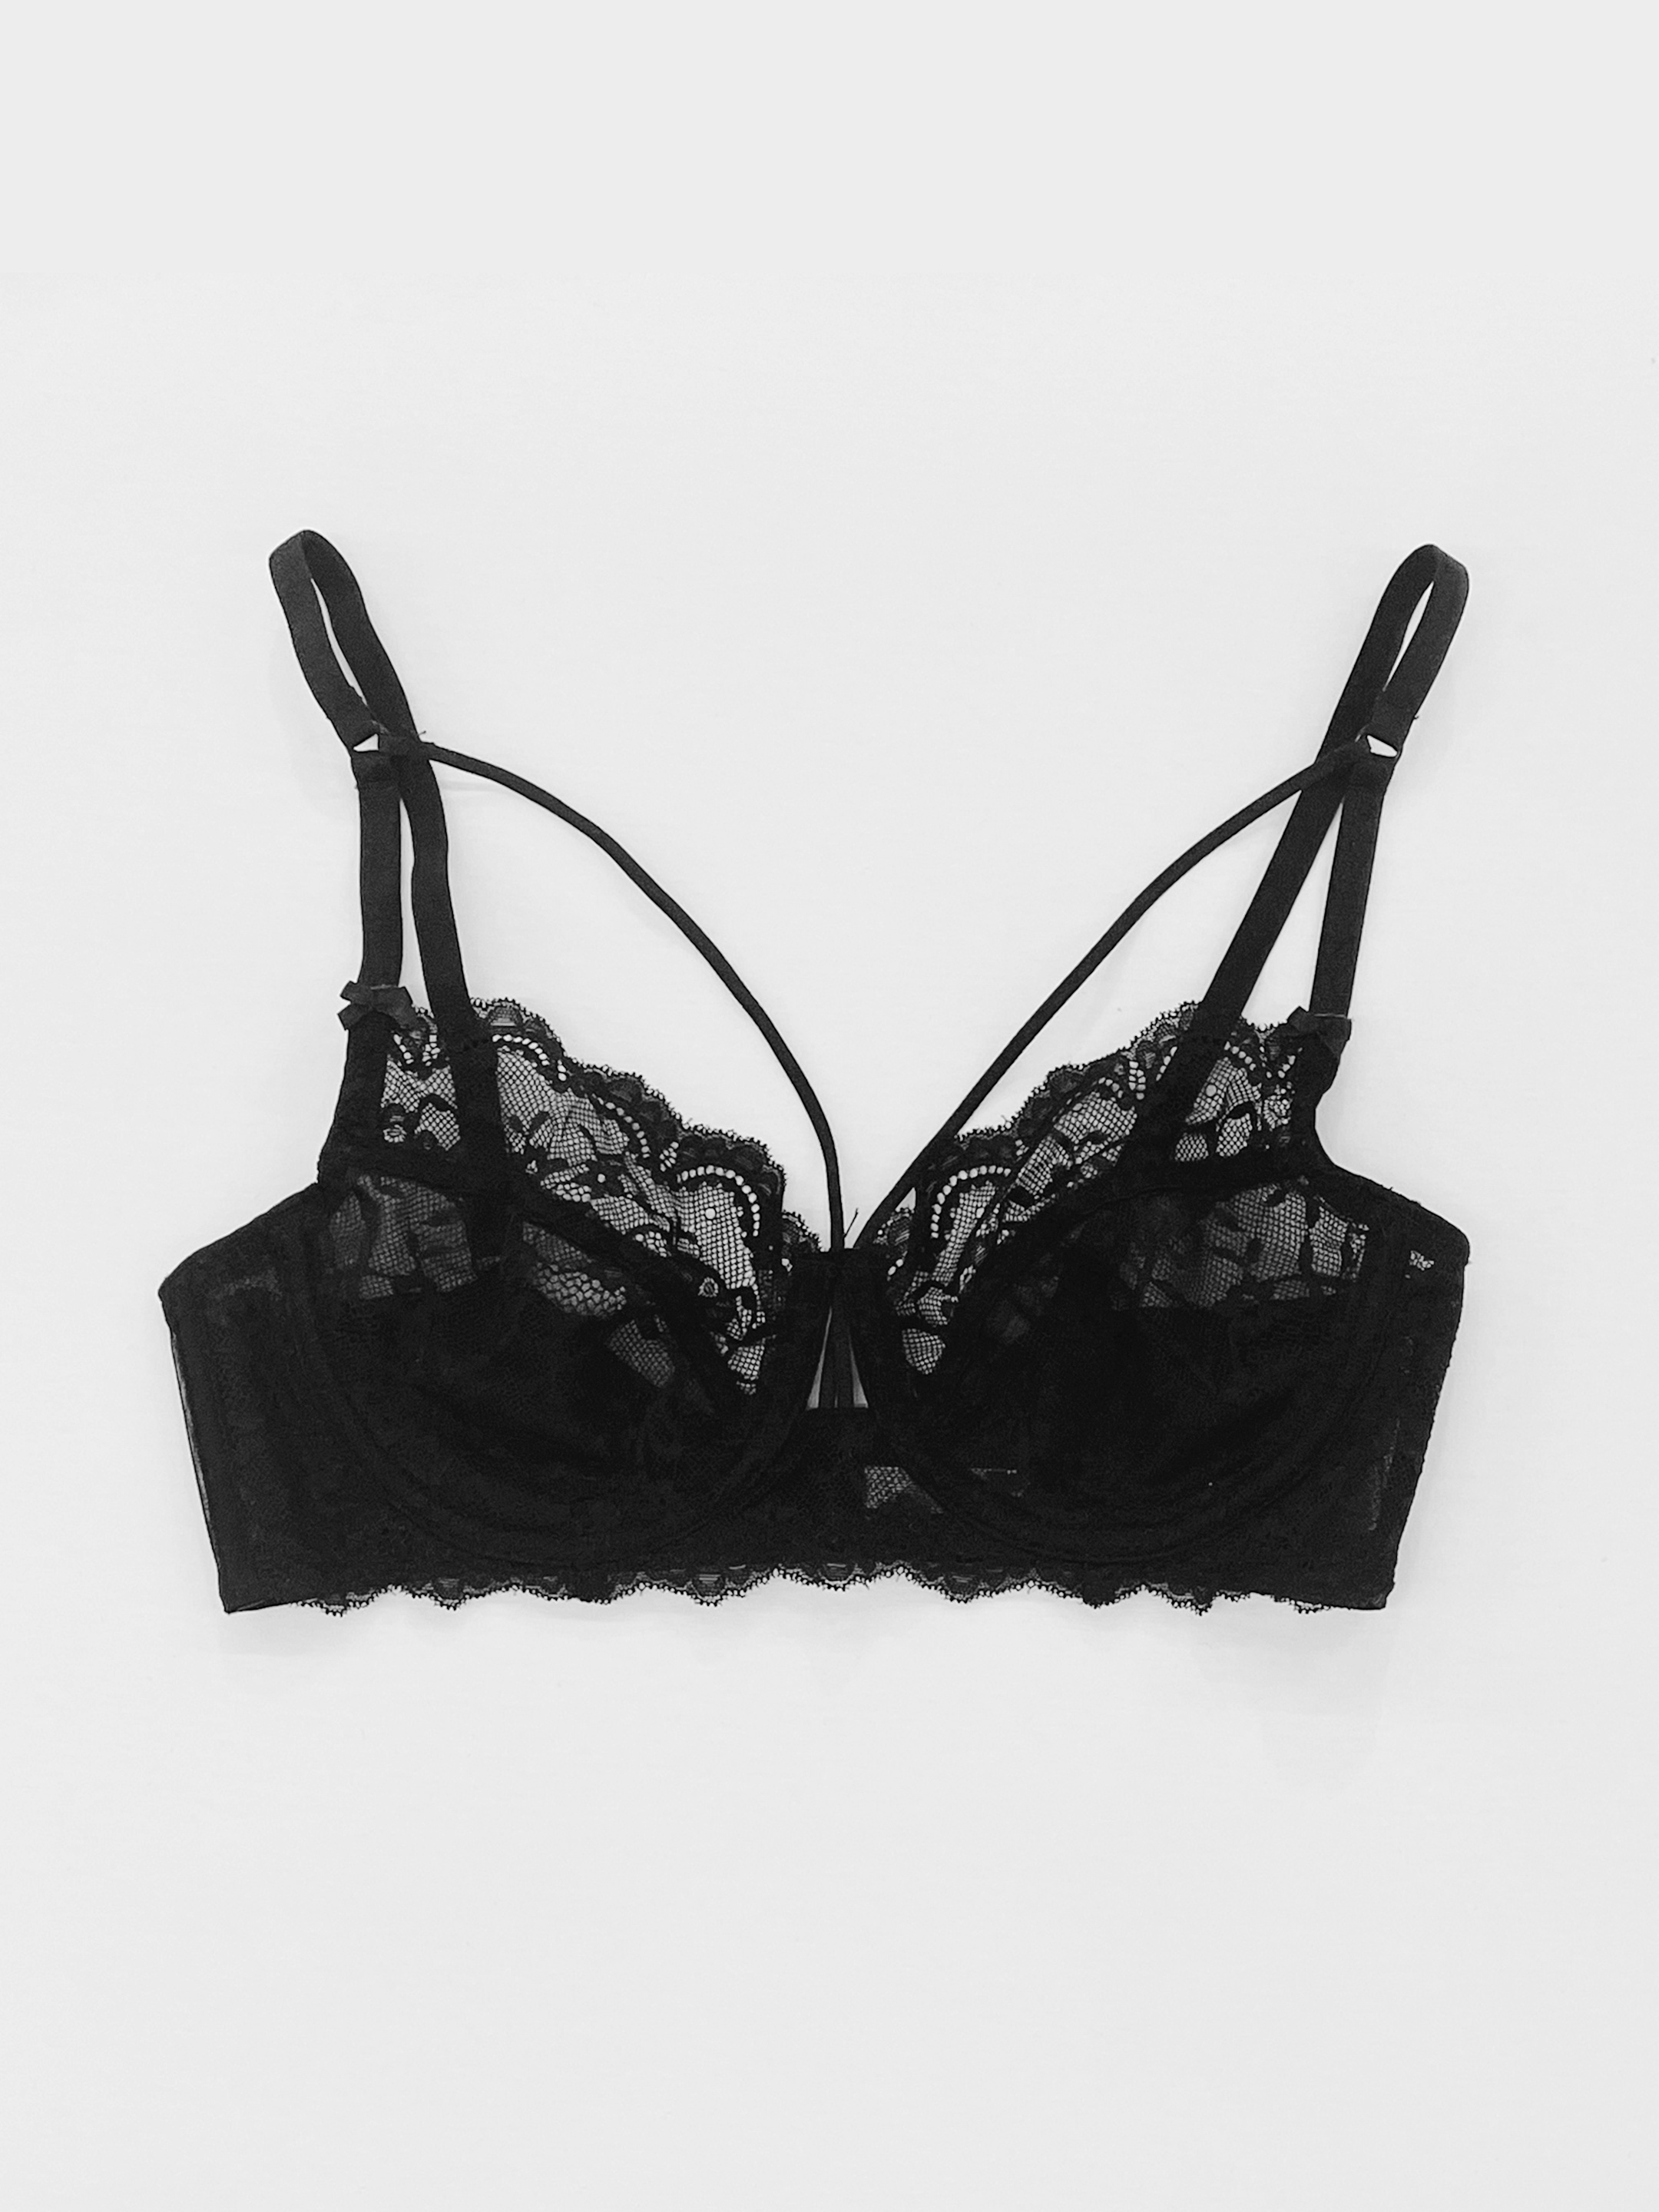 Warner's Sexy Sheer Black Ultra Thin Lace Bralette()